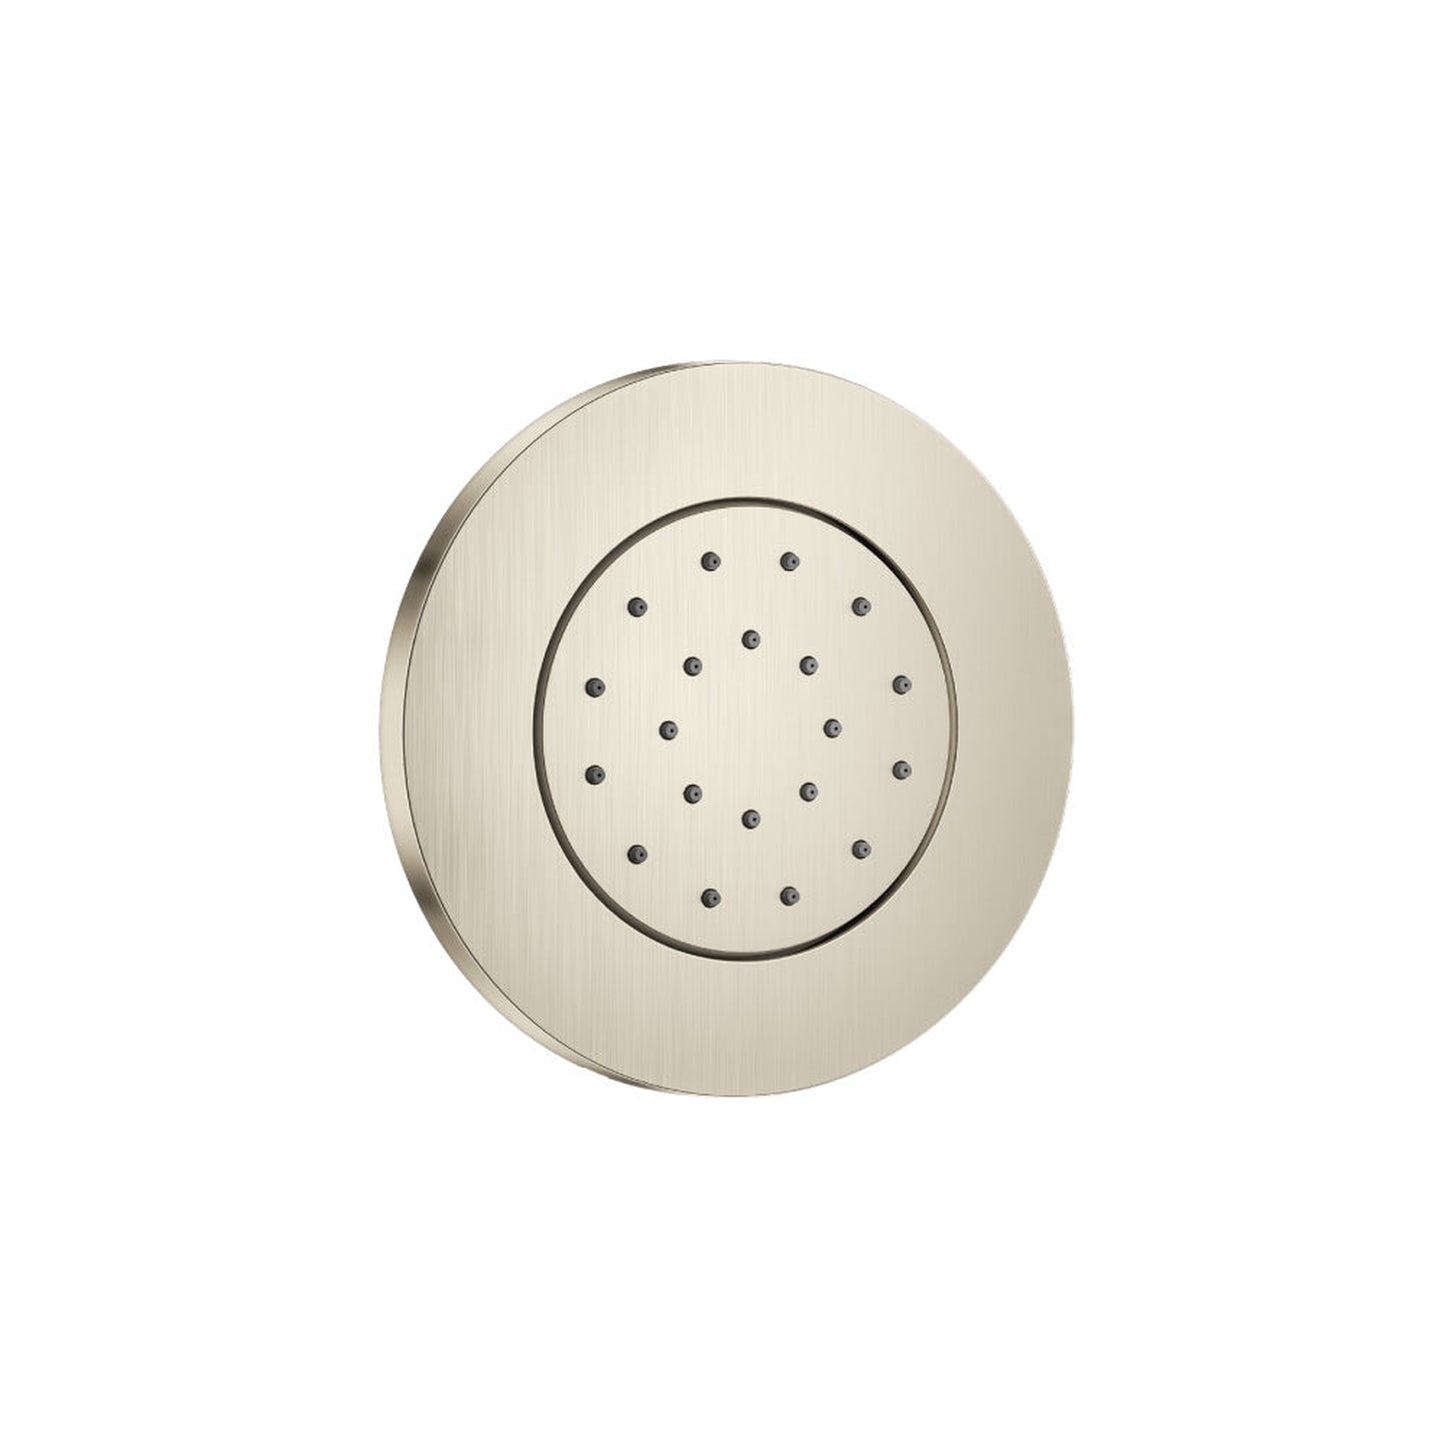 Isenberg Serie 100 1/2" Body Jet With Concealed Valve in Brushed Nickel